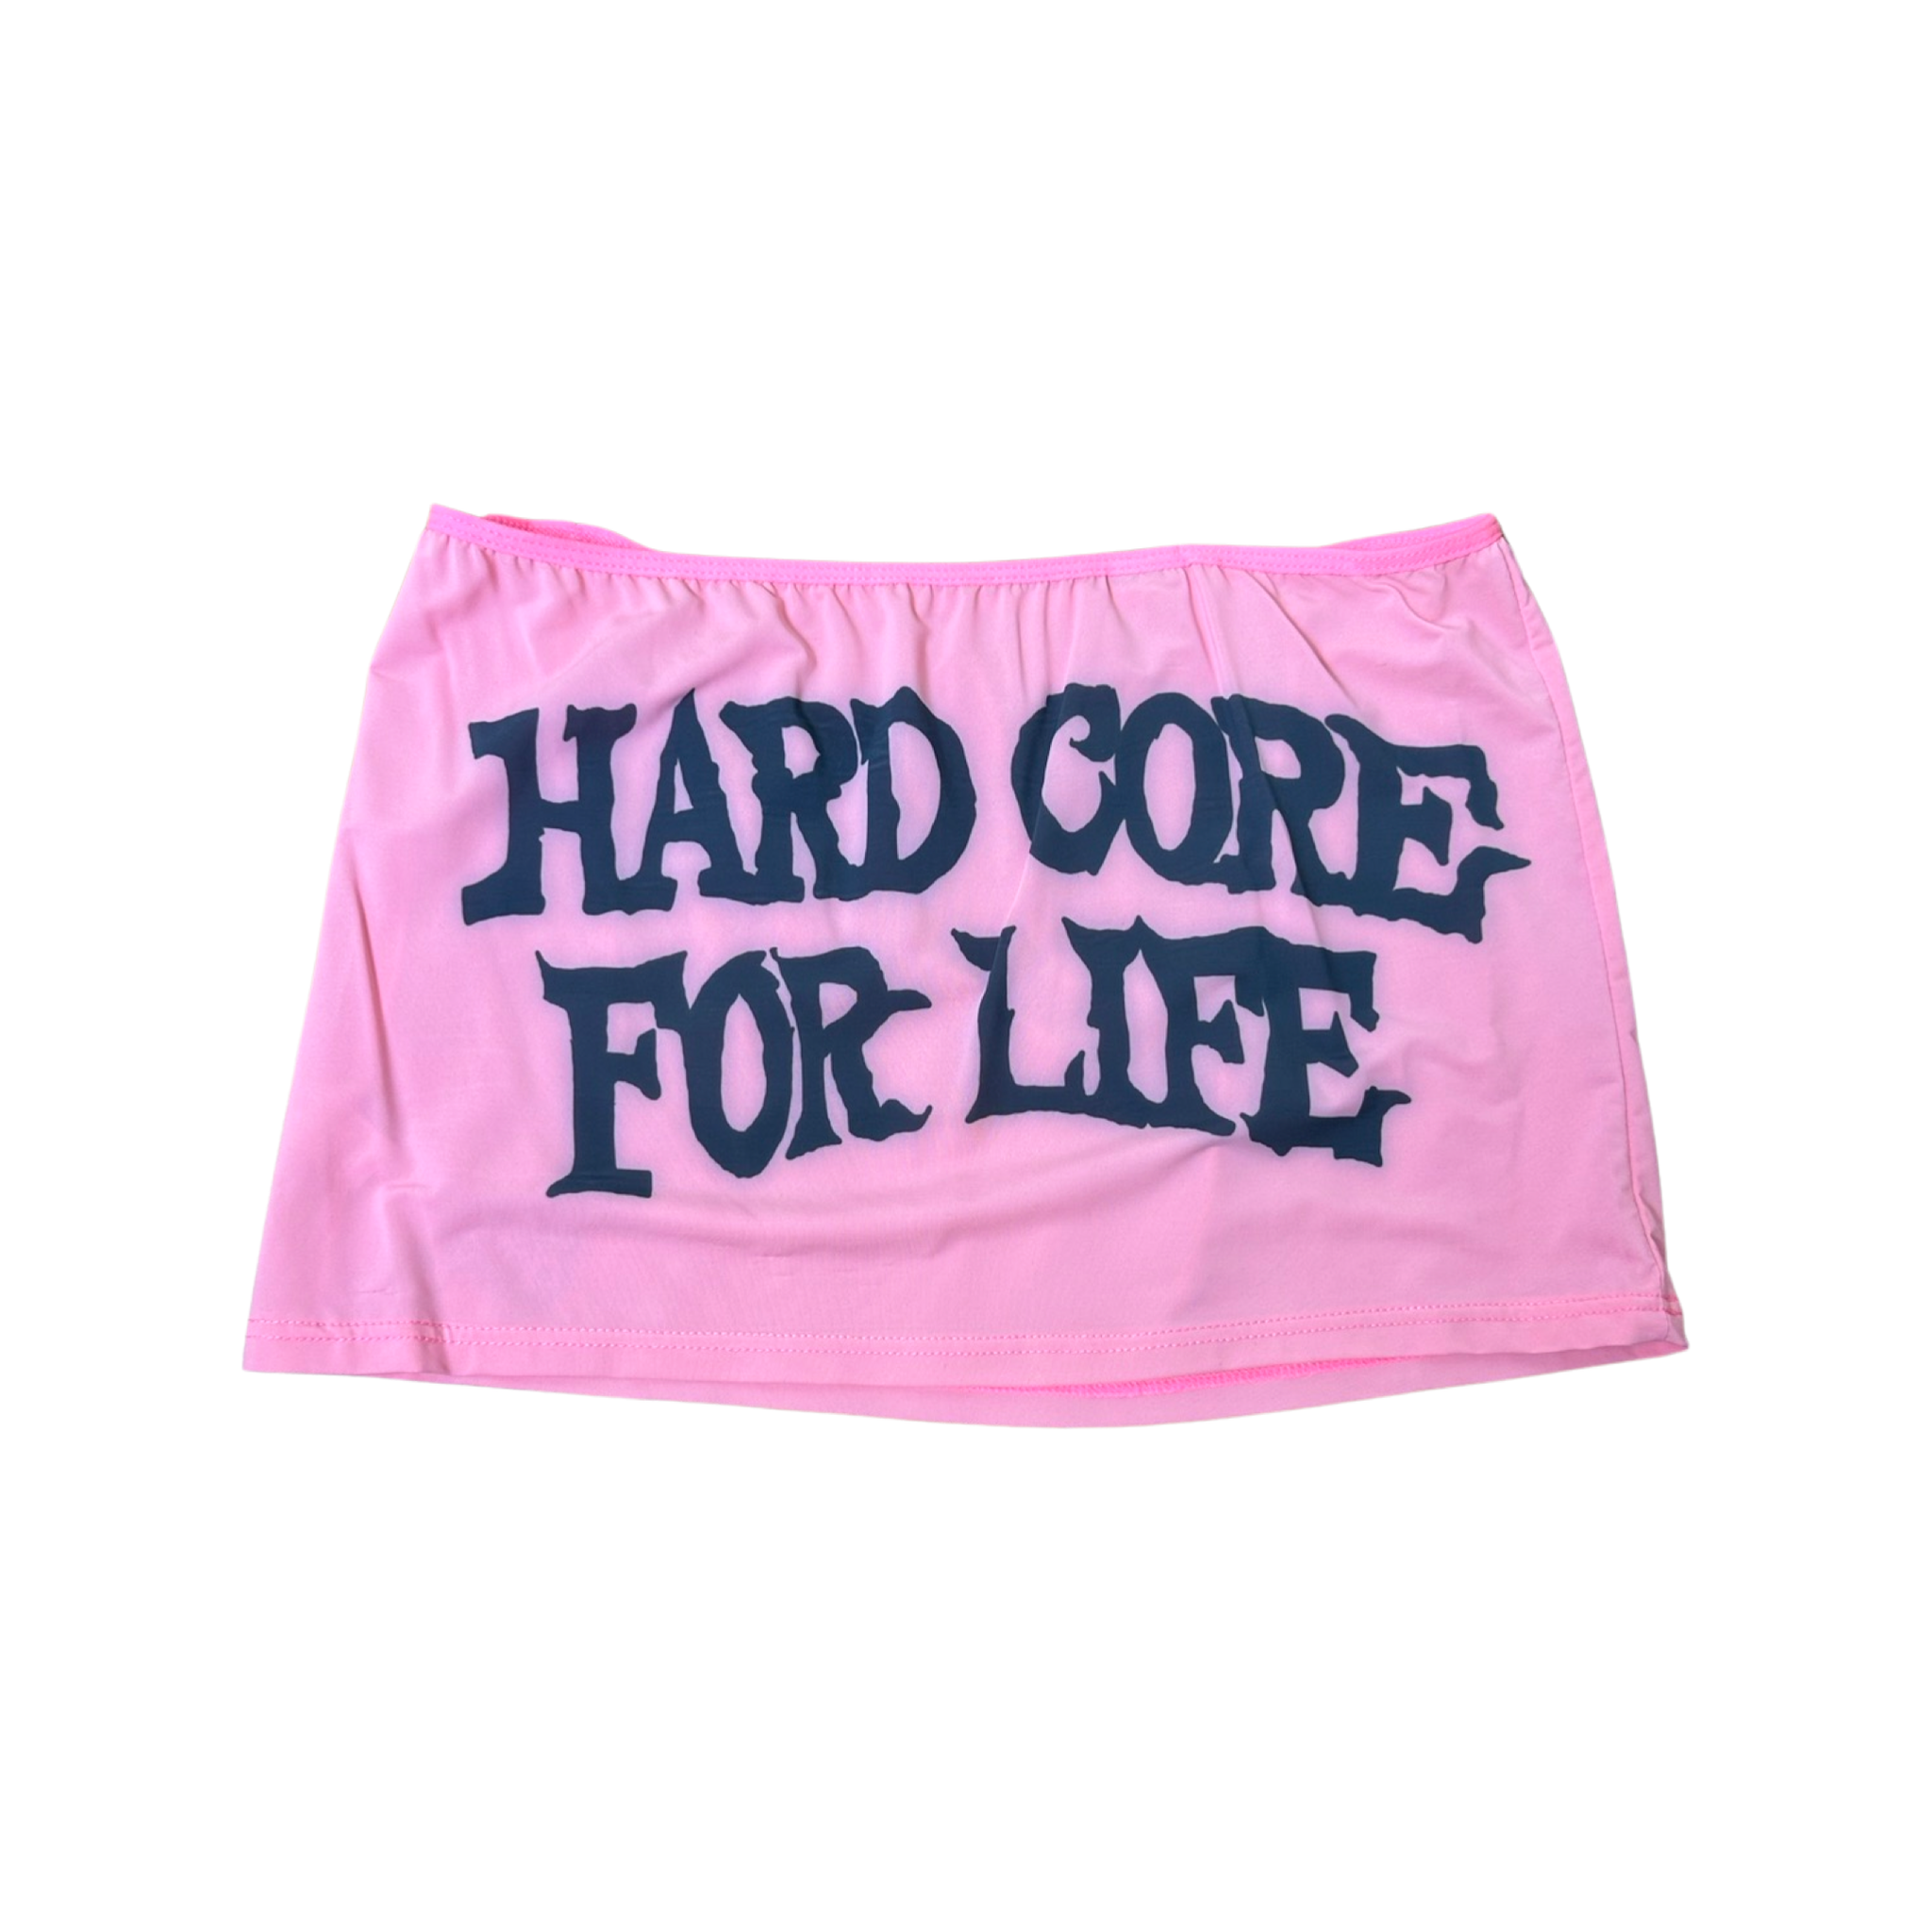 Hardcore for life mini IN PINK